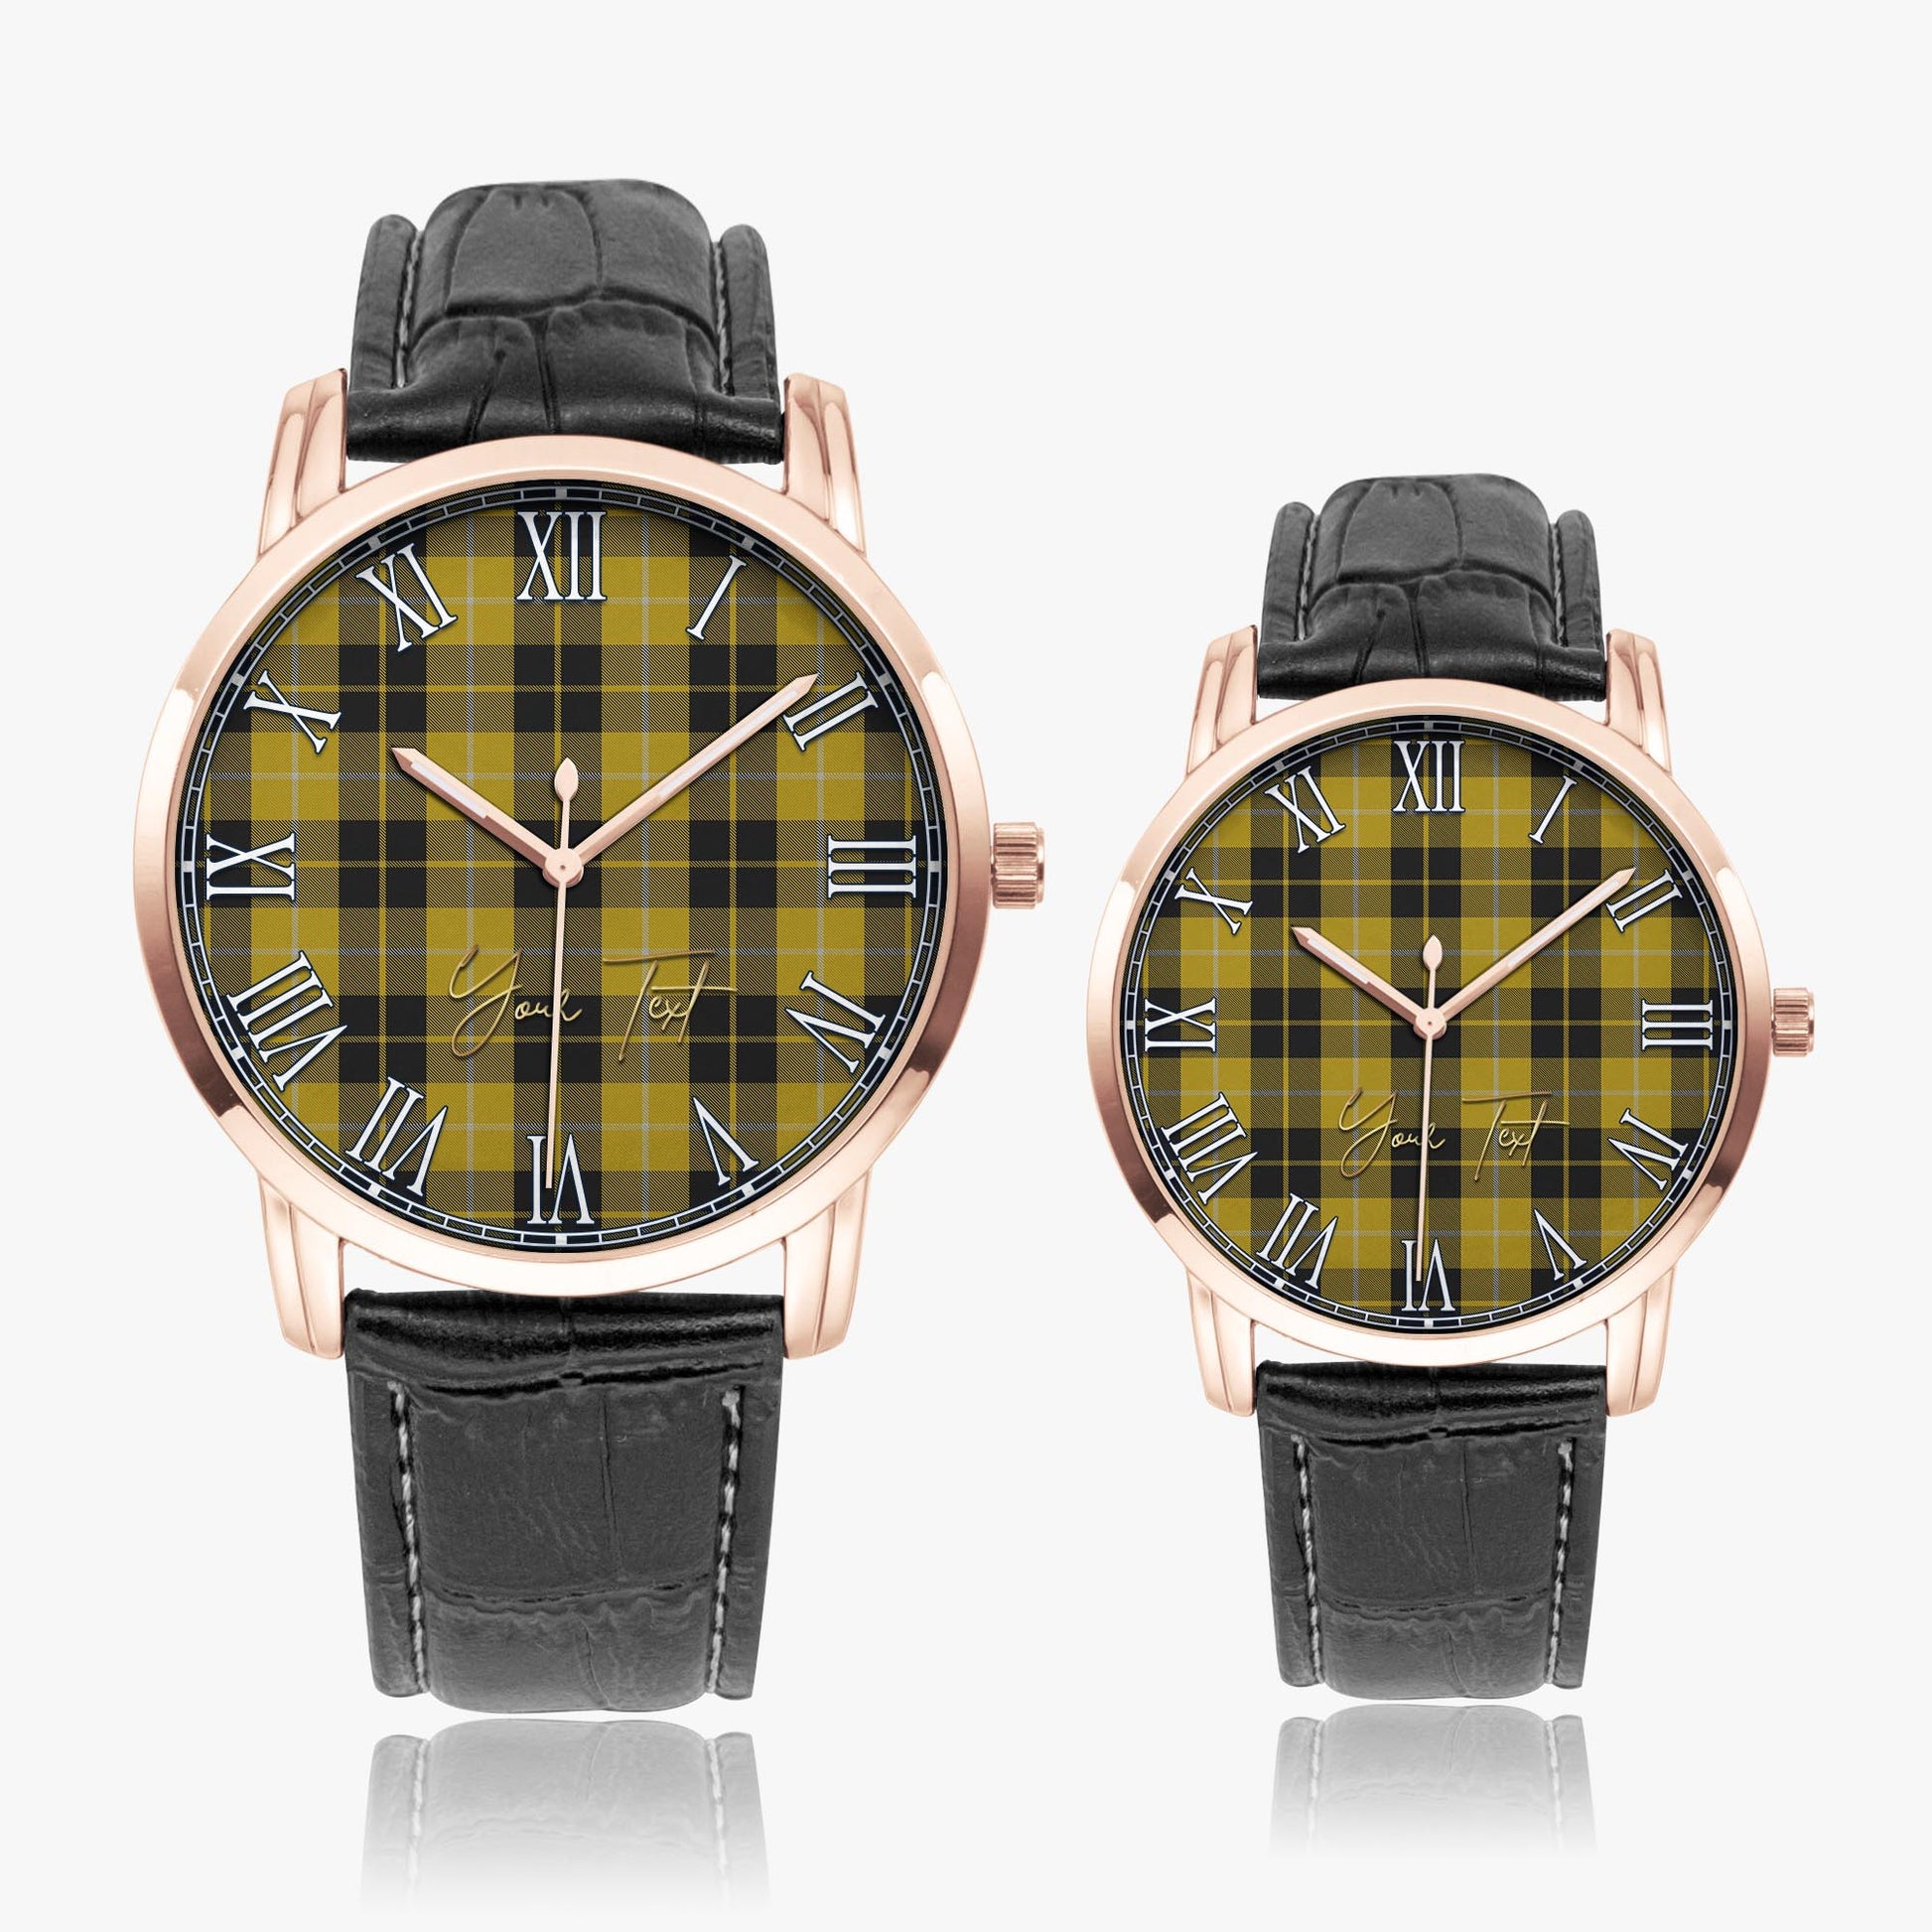 Barclay Dress Tartan Personalized Your Text Leather Trap Quartz Watch Wide Type Rose Gold Case With Black Leather Strap - Tartanvibesclothing